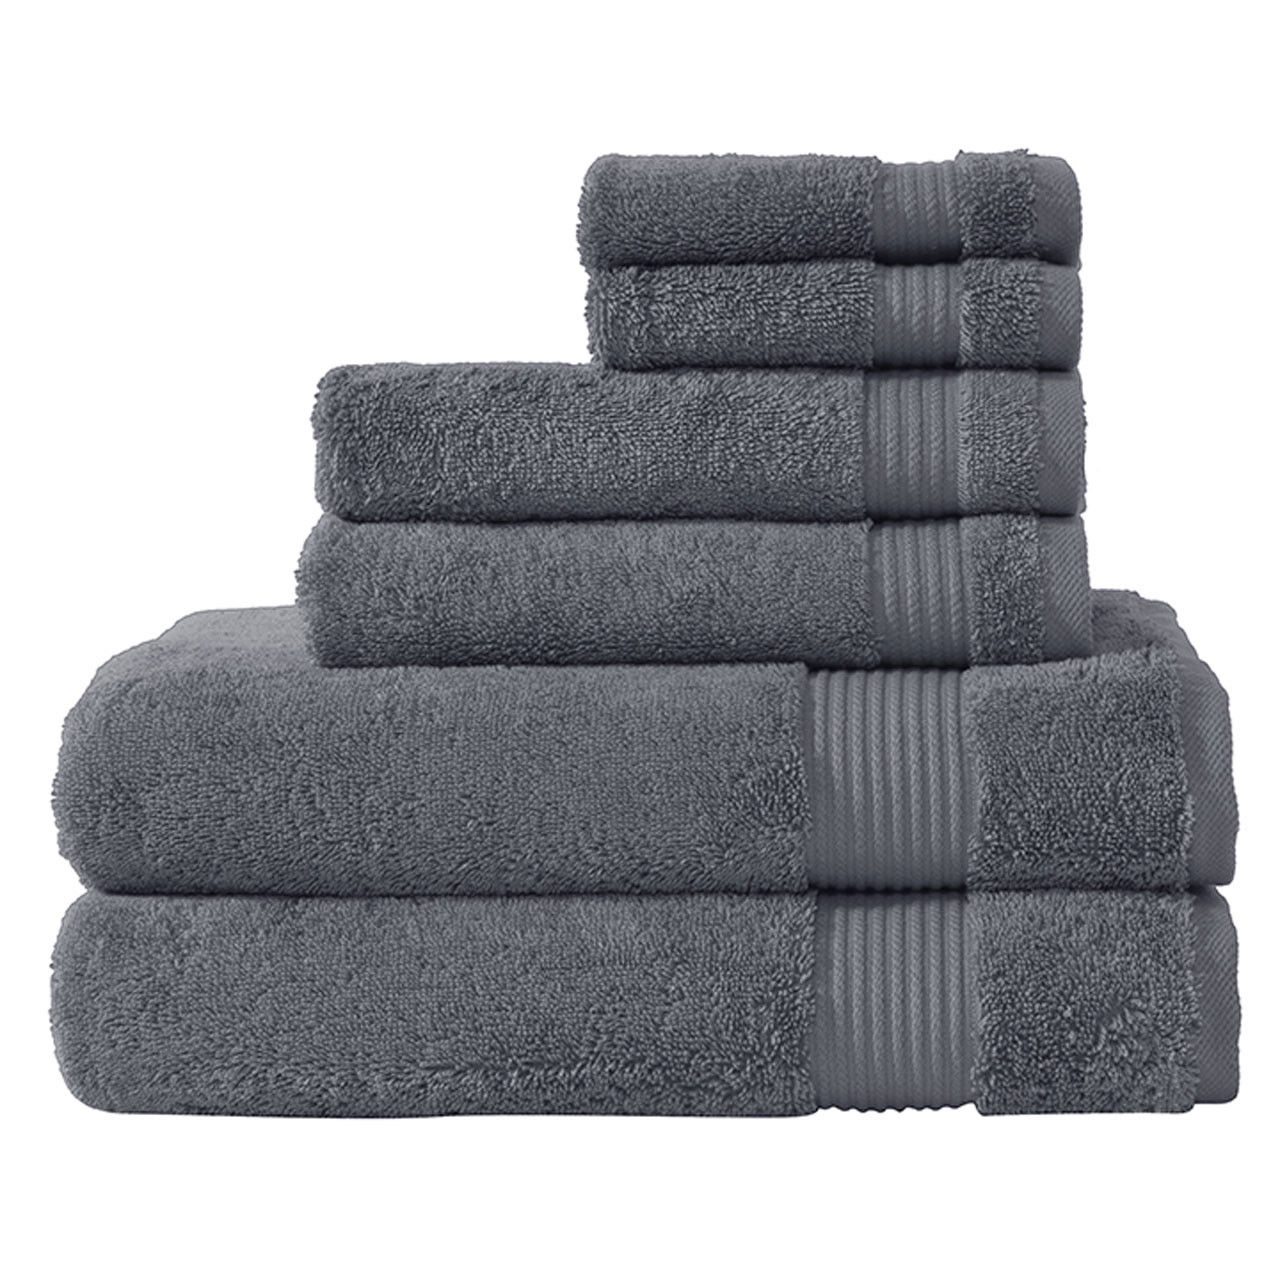 Can you describe the design of the gray towels in the Amadeus Turkish Collection?